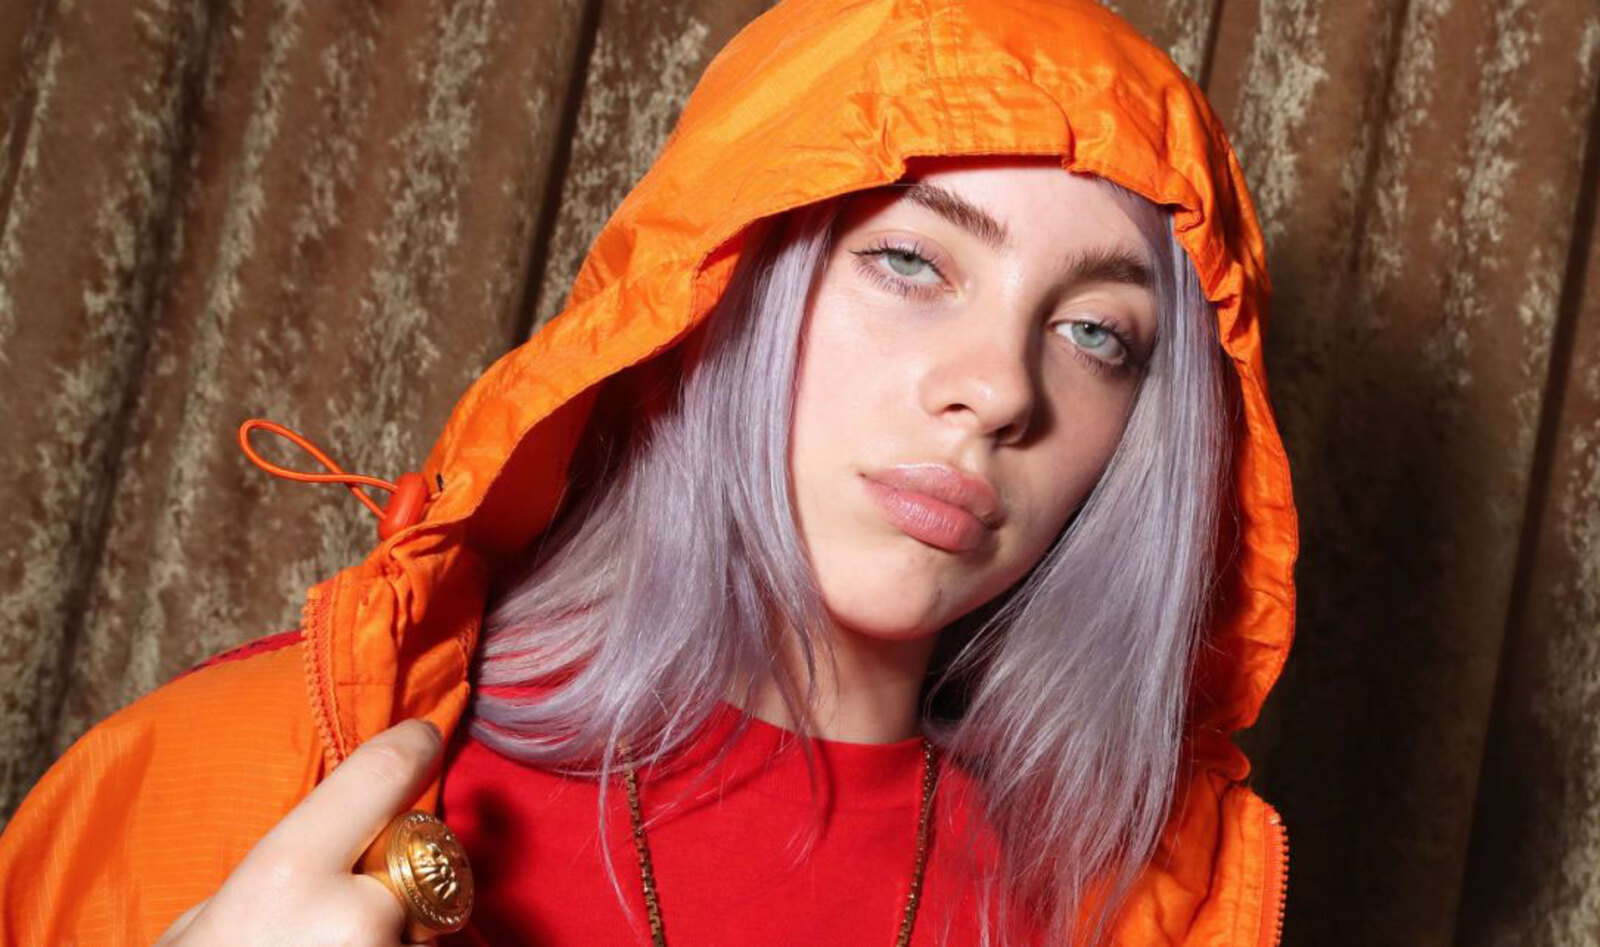 Billie Eilish Offers Chance to Win Free Concert Tickets to Fans Who Take Climate Action